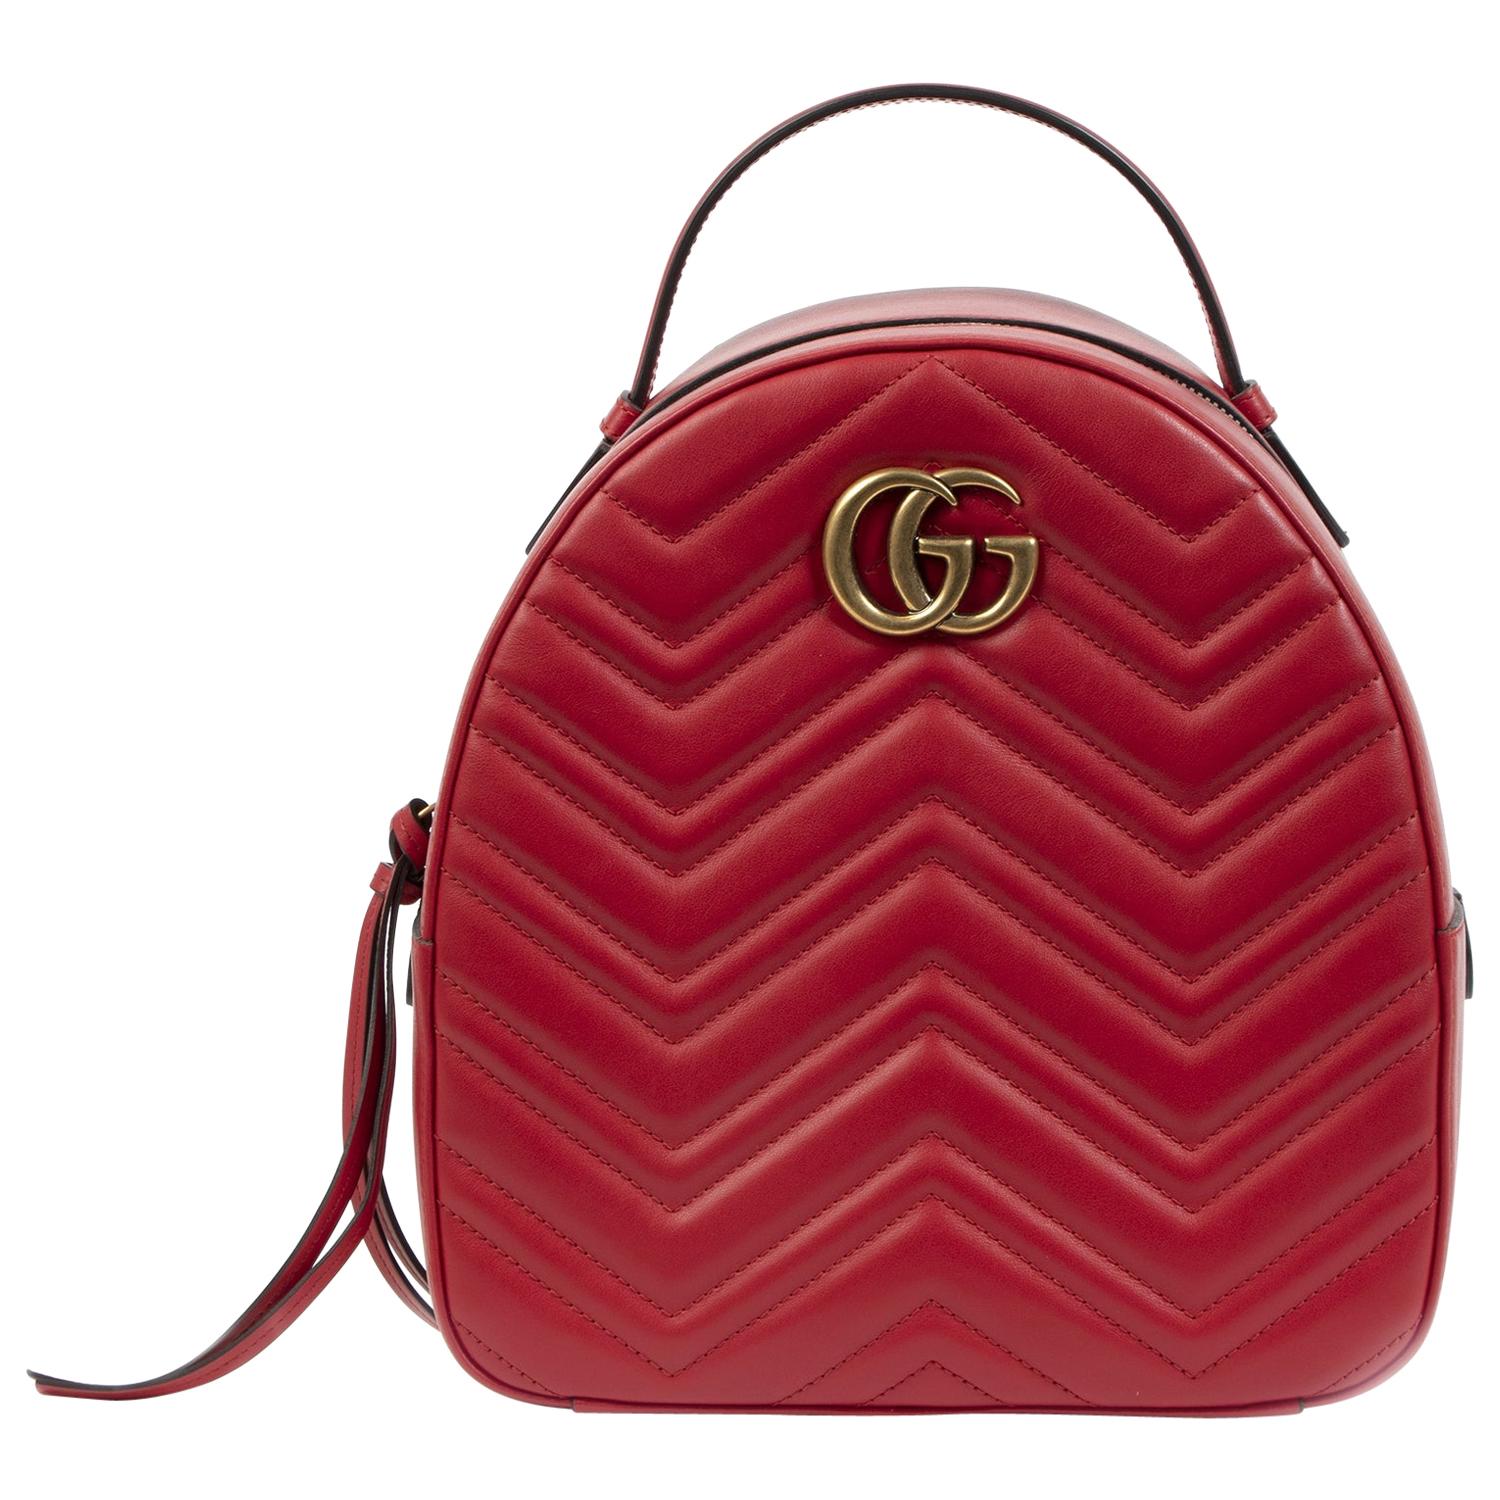 Gucci GG Marmont Matelassé Leather Backpack